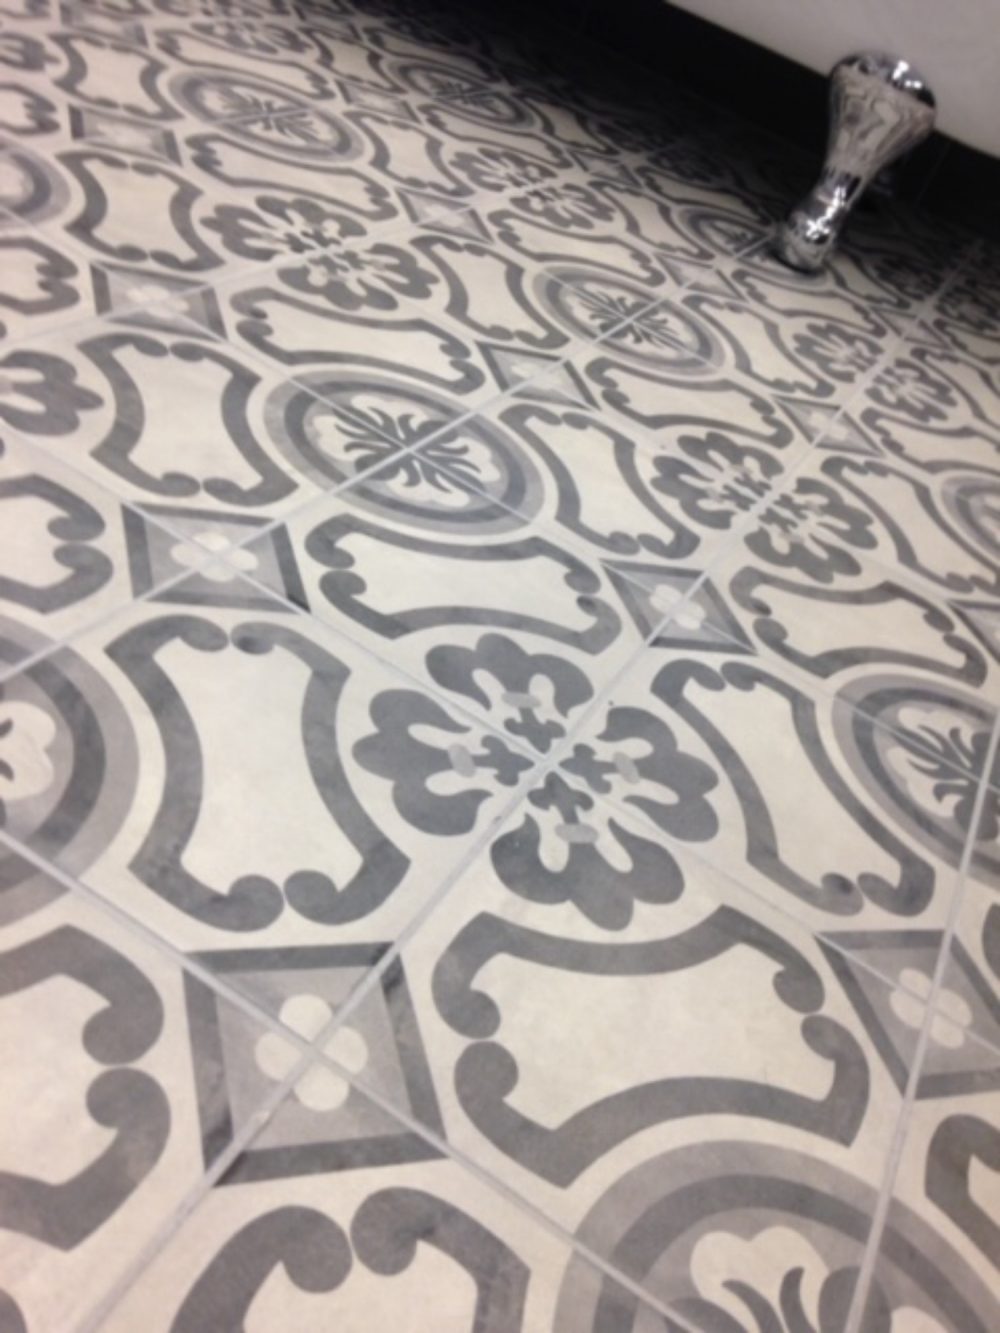 Antres patterned tiles - victorian tiles